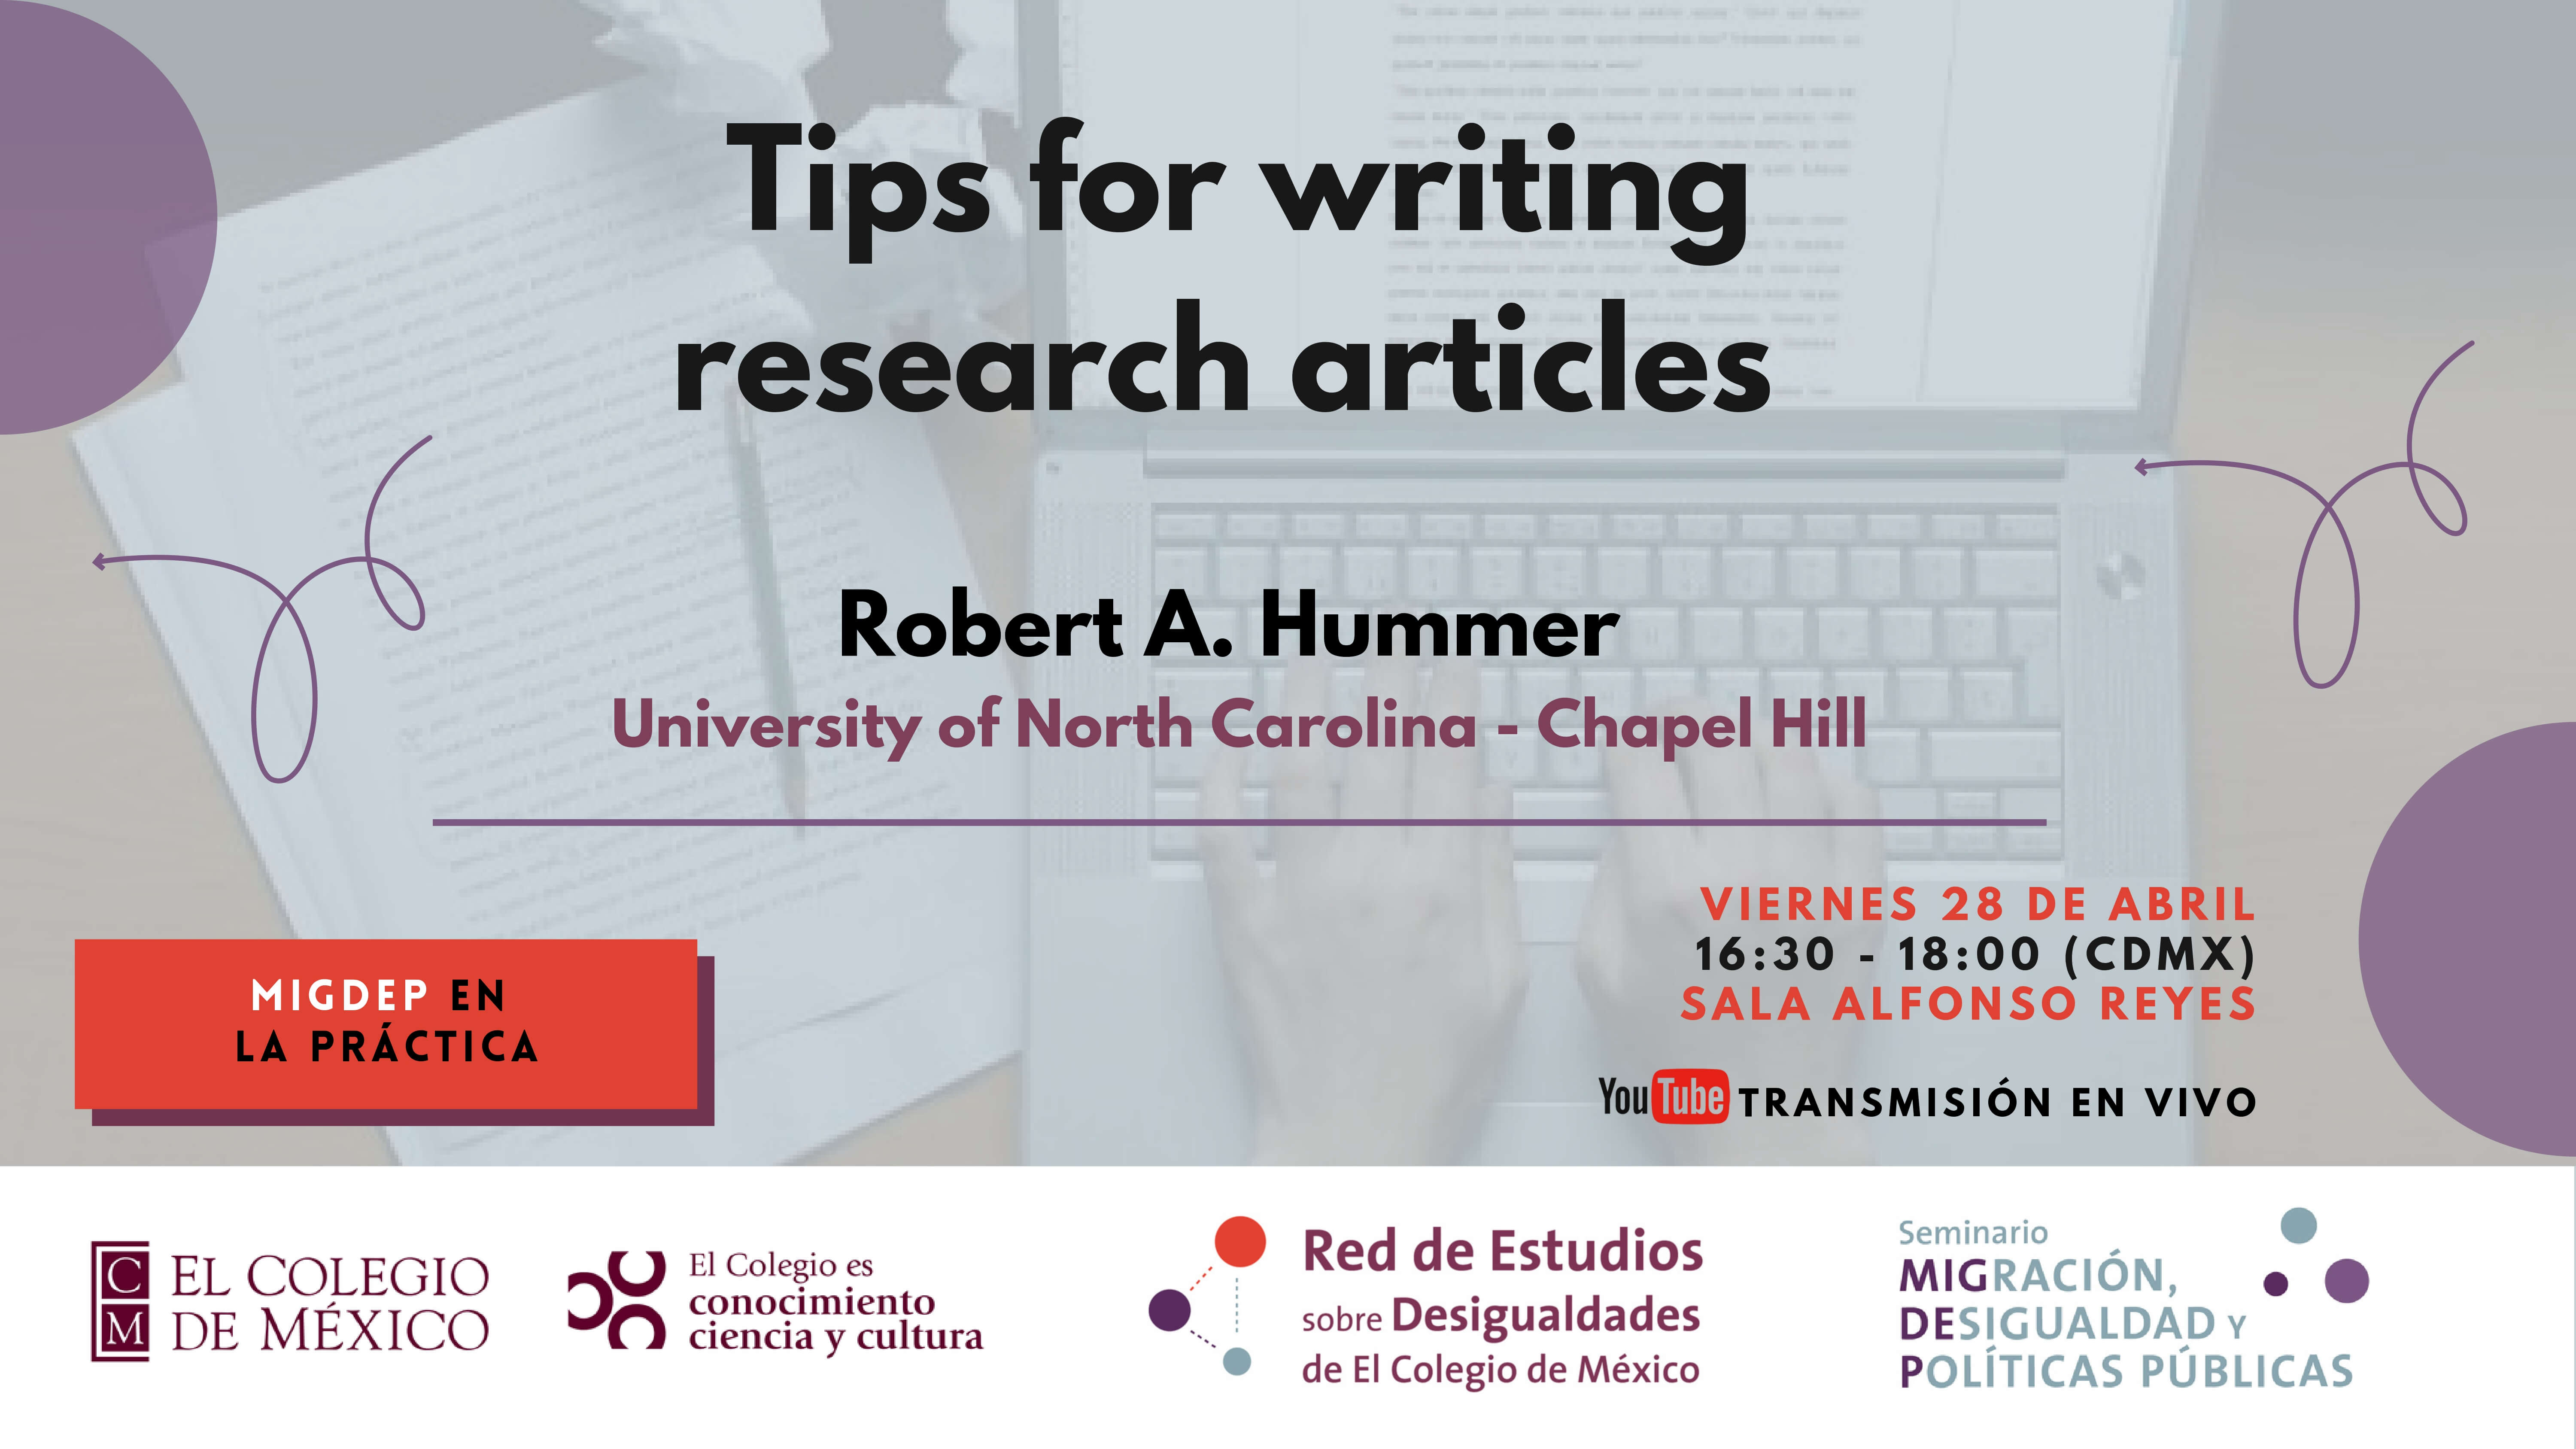 Tips for writing research articles<